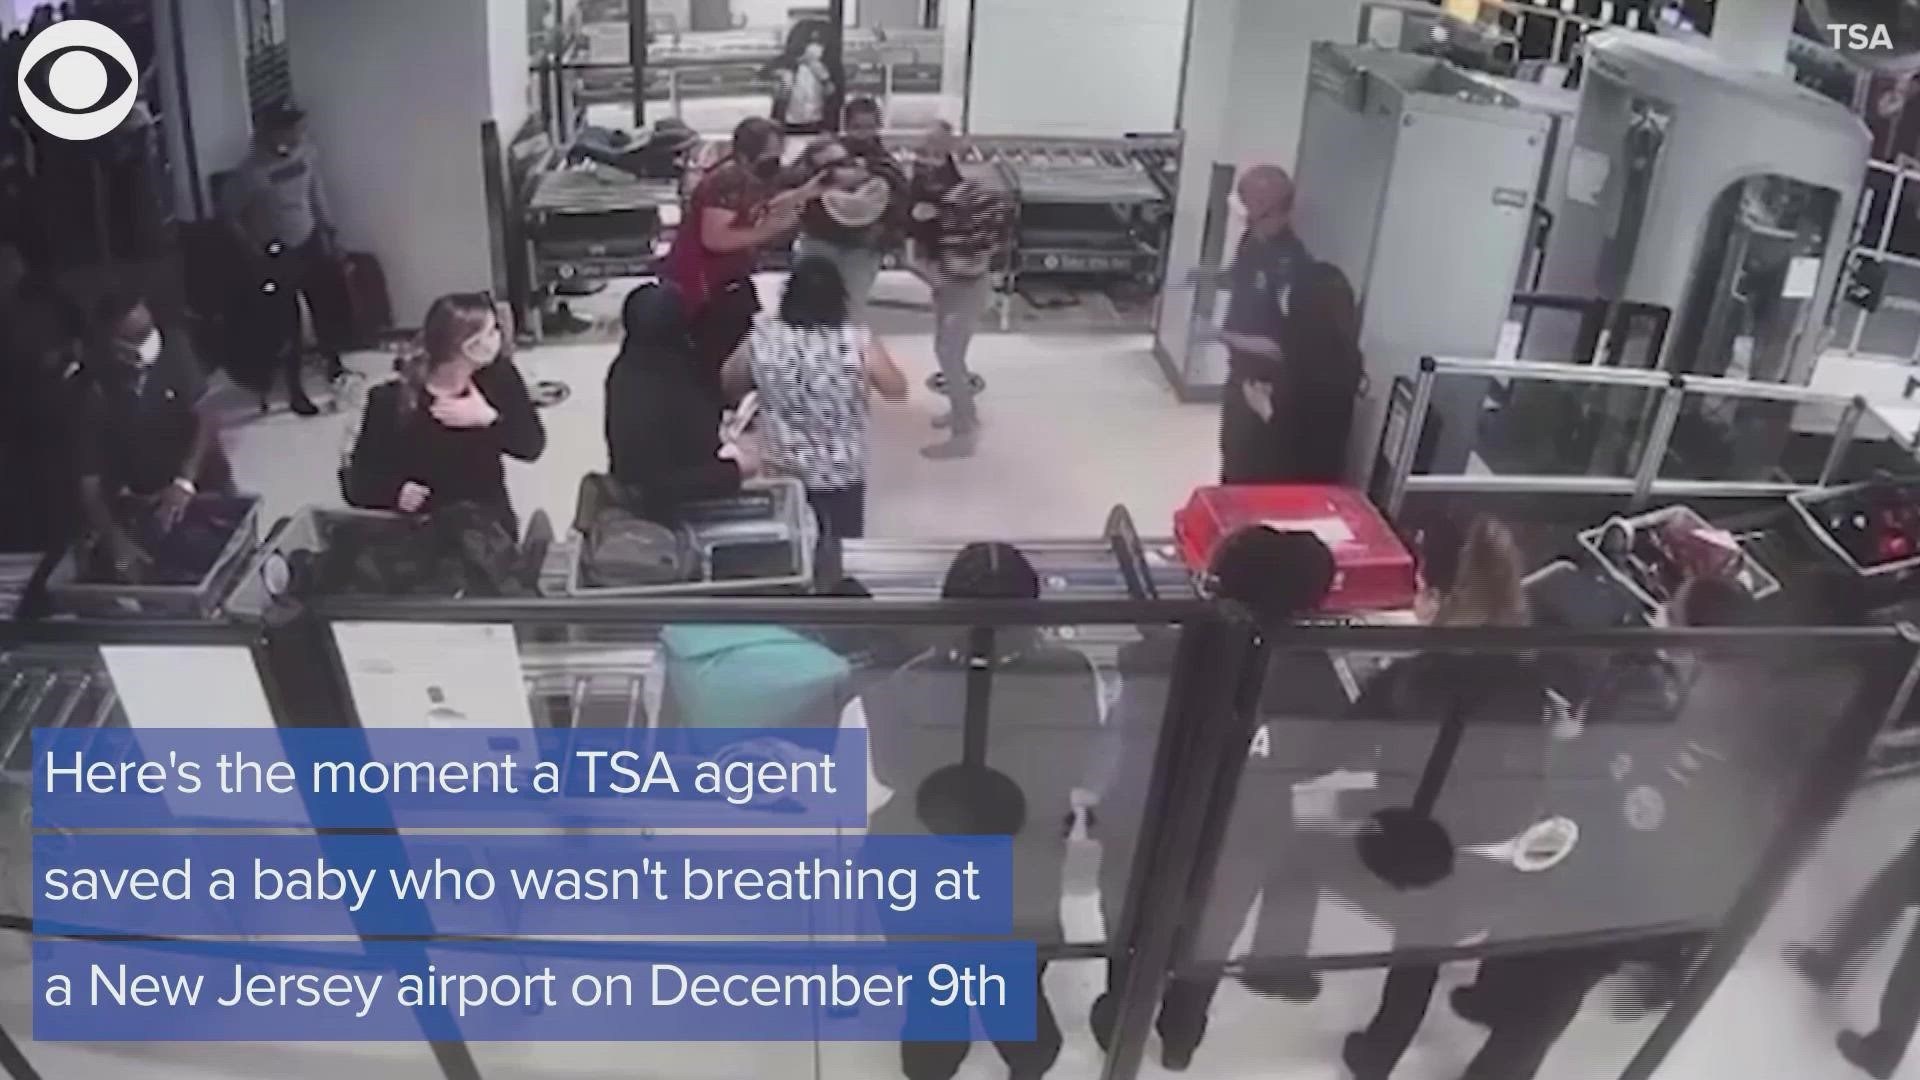 A rookie TSA officer recently saved a baby's life at a security checkpoint inside Newark Liberty International, the agency announced Thursday.